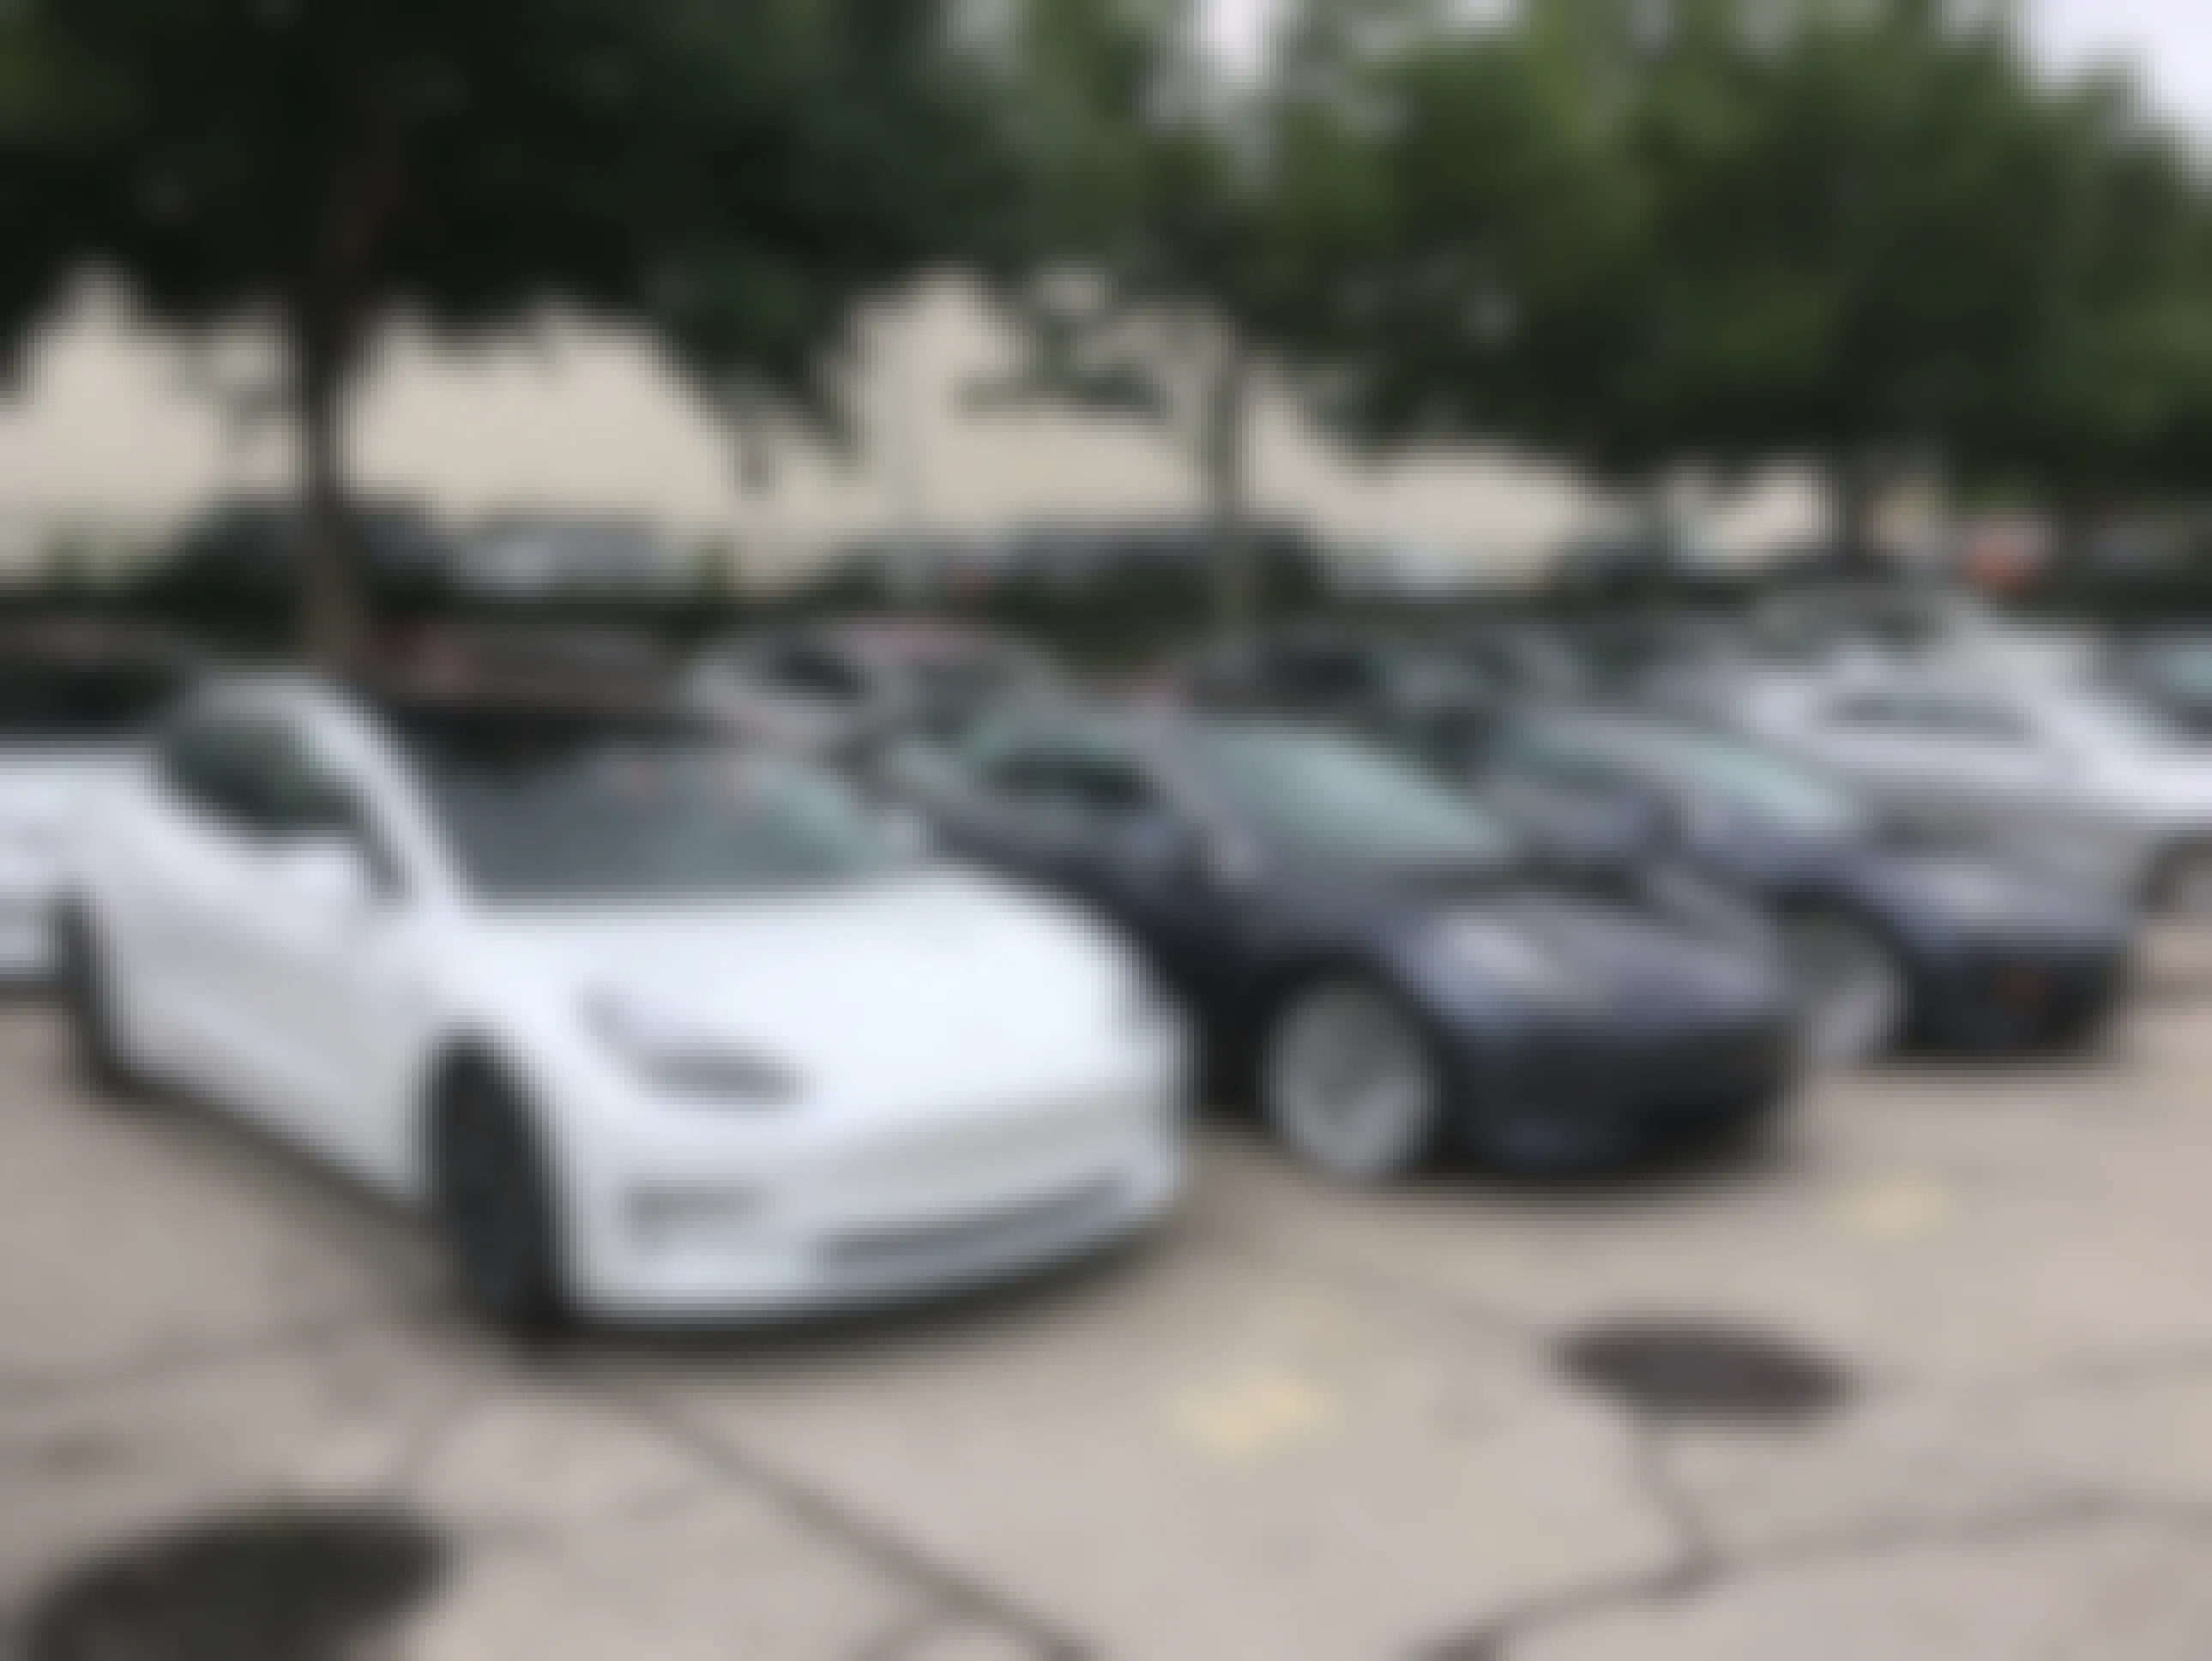 A parking lot full of Tesla model 3 electric vehicles